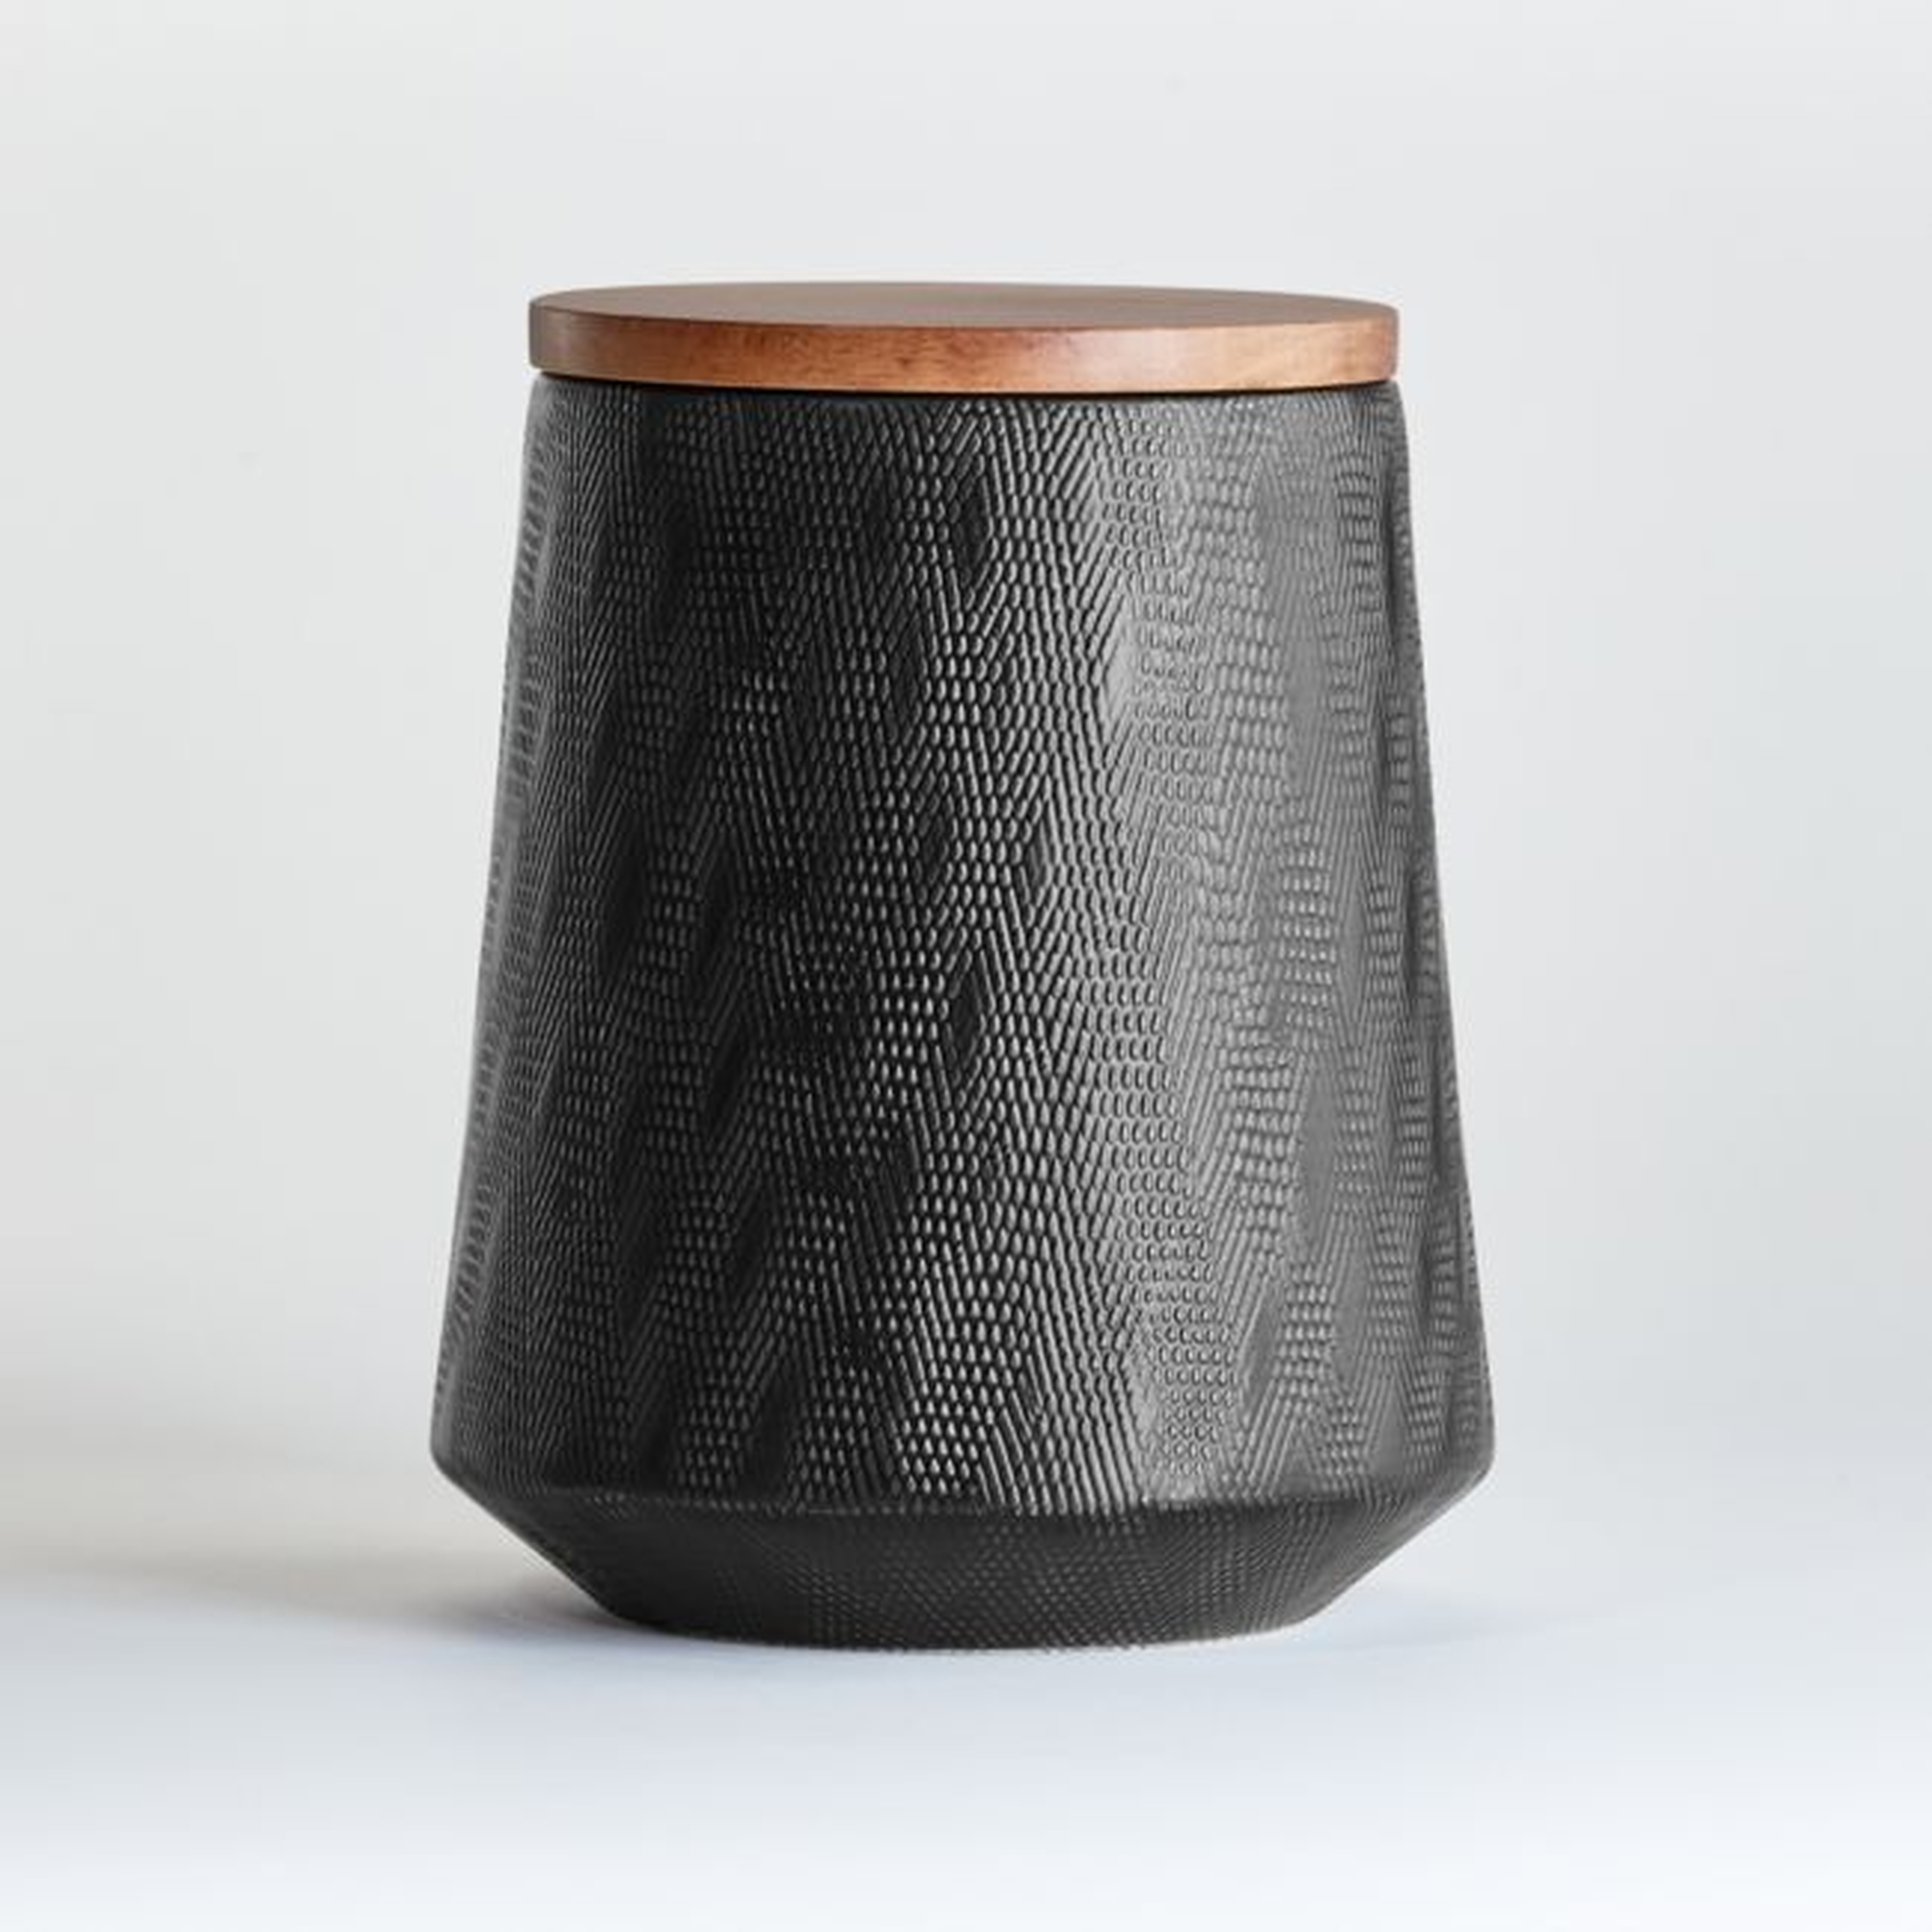 Ethan Large Black Canister - Crate and Barrel